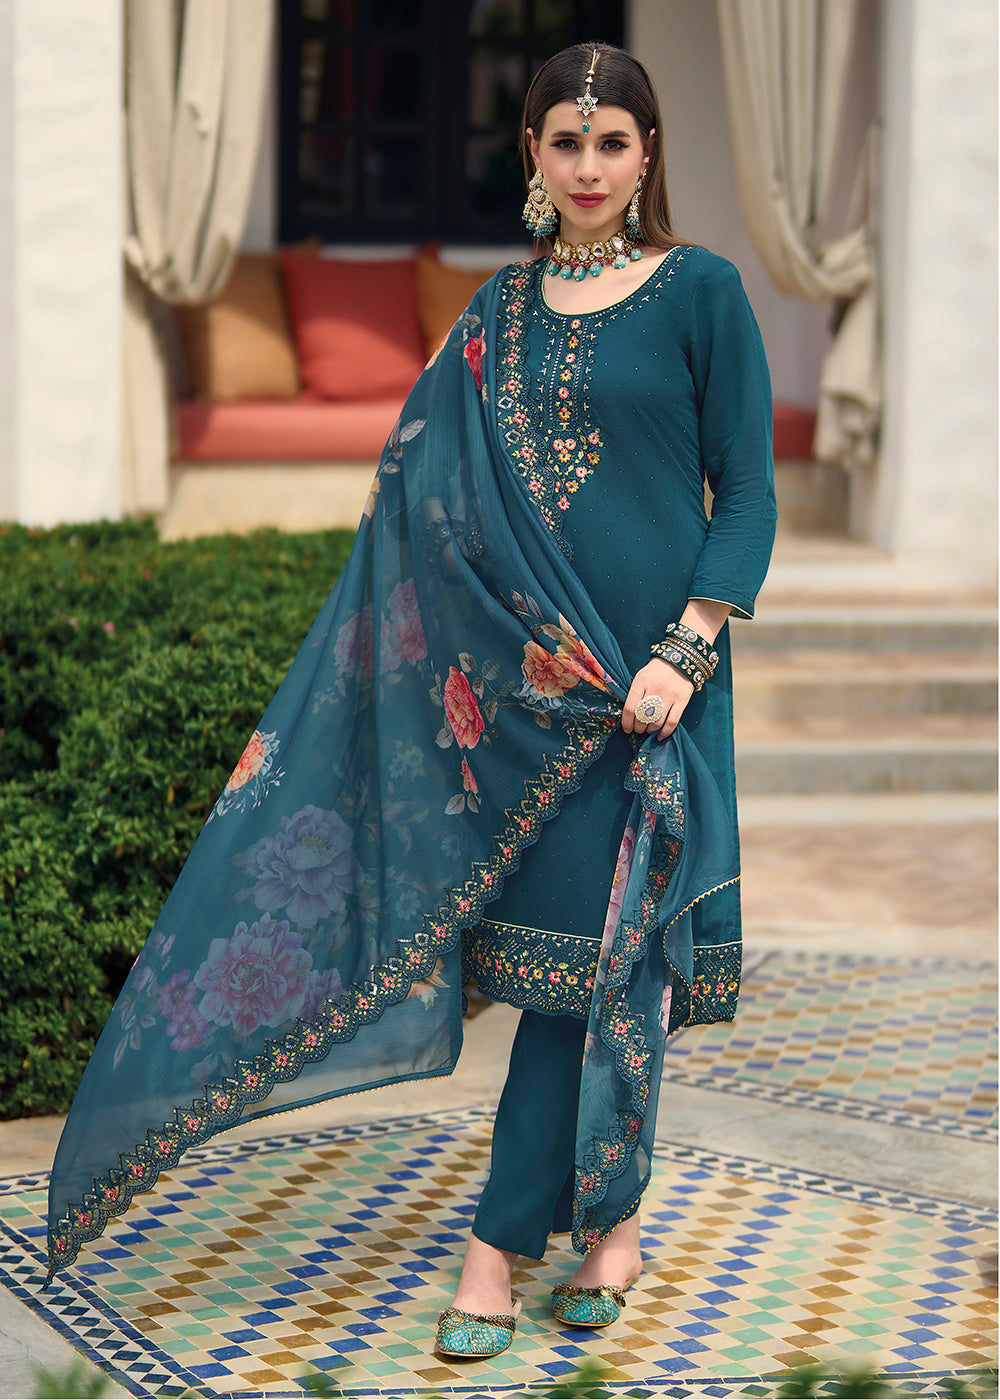 Buy Now Viscose Silk Teal Blue Pakistani Pant Style Salwar Suit Online in USA, UK, Canada, Germany, Australia & Worldwide at Empress Clothing.